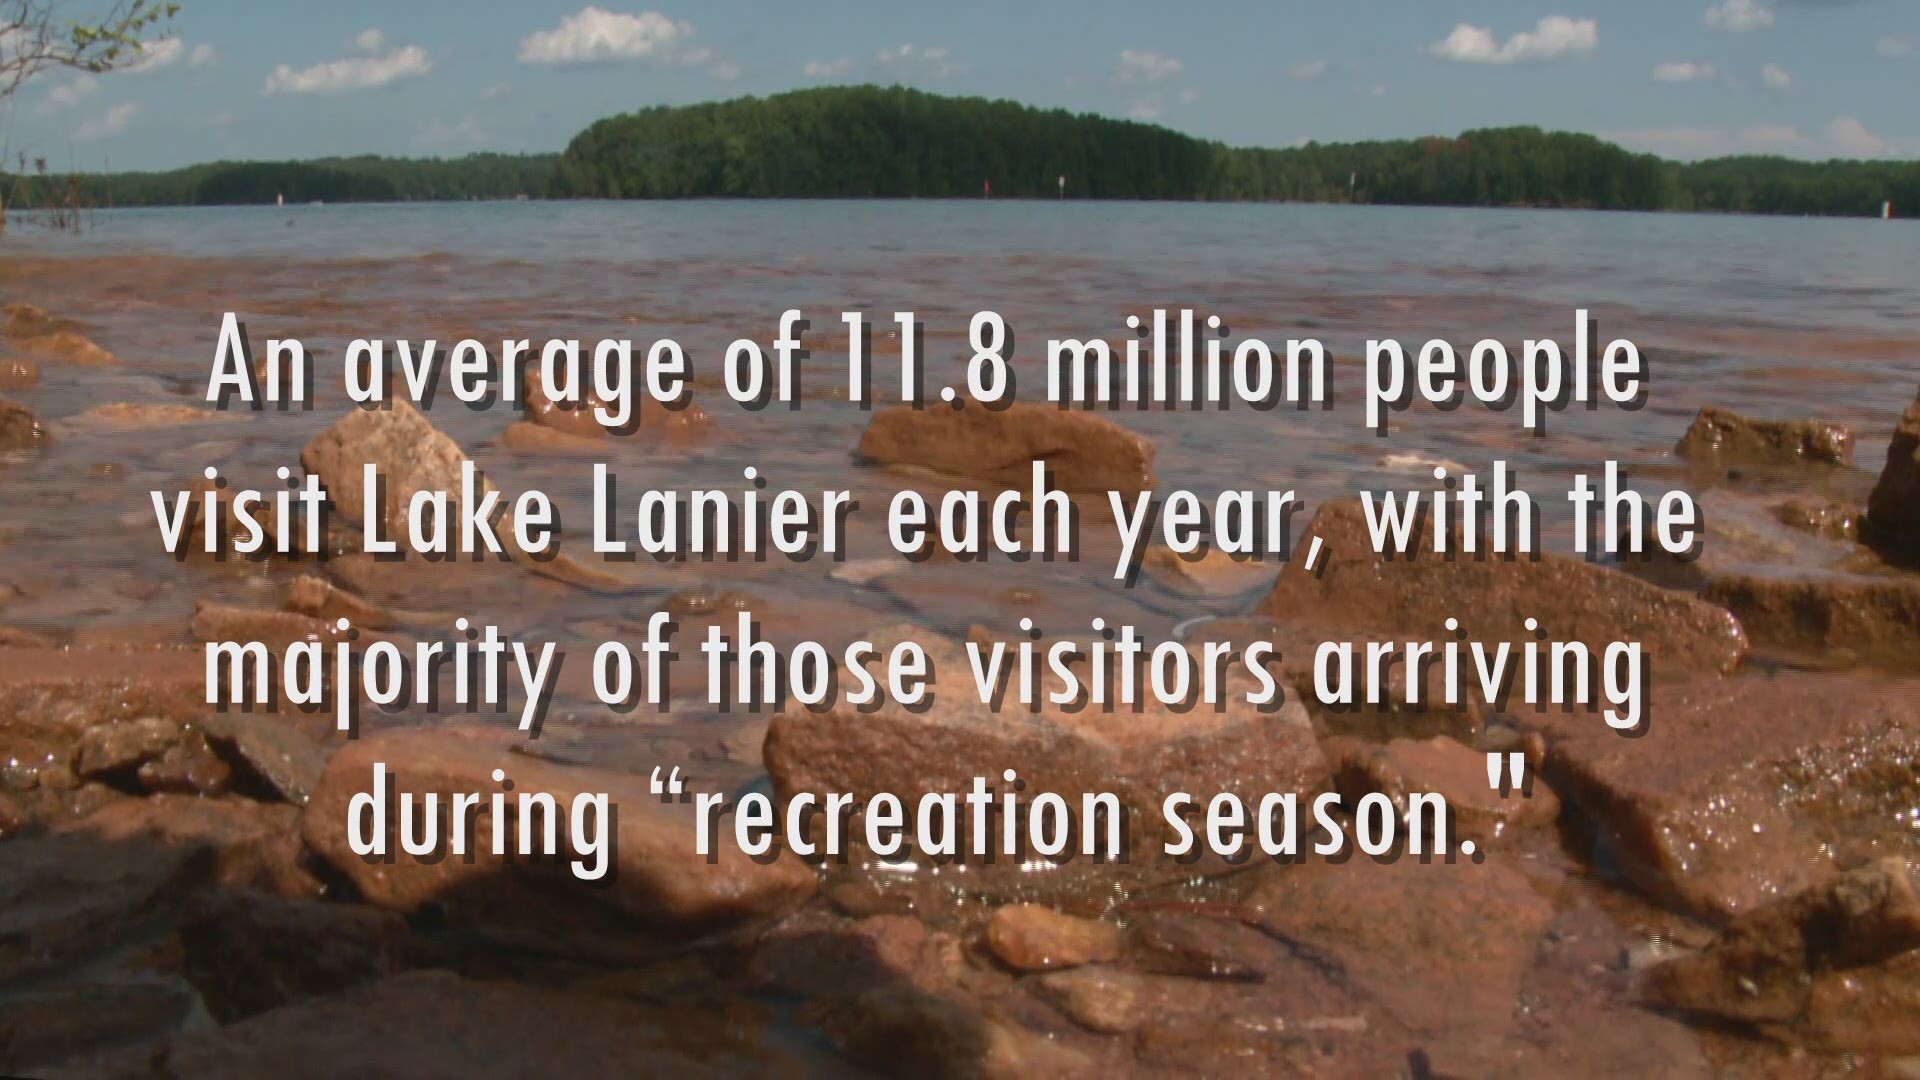 Lake Lanier Safety Task Force meets to discuss lake safety ahead of holiday weekend.